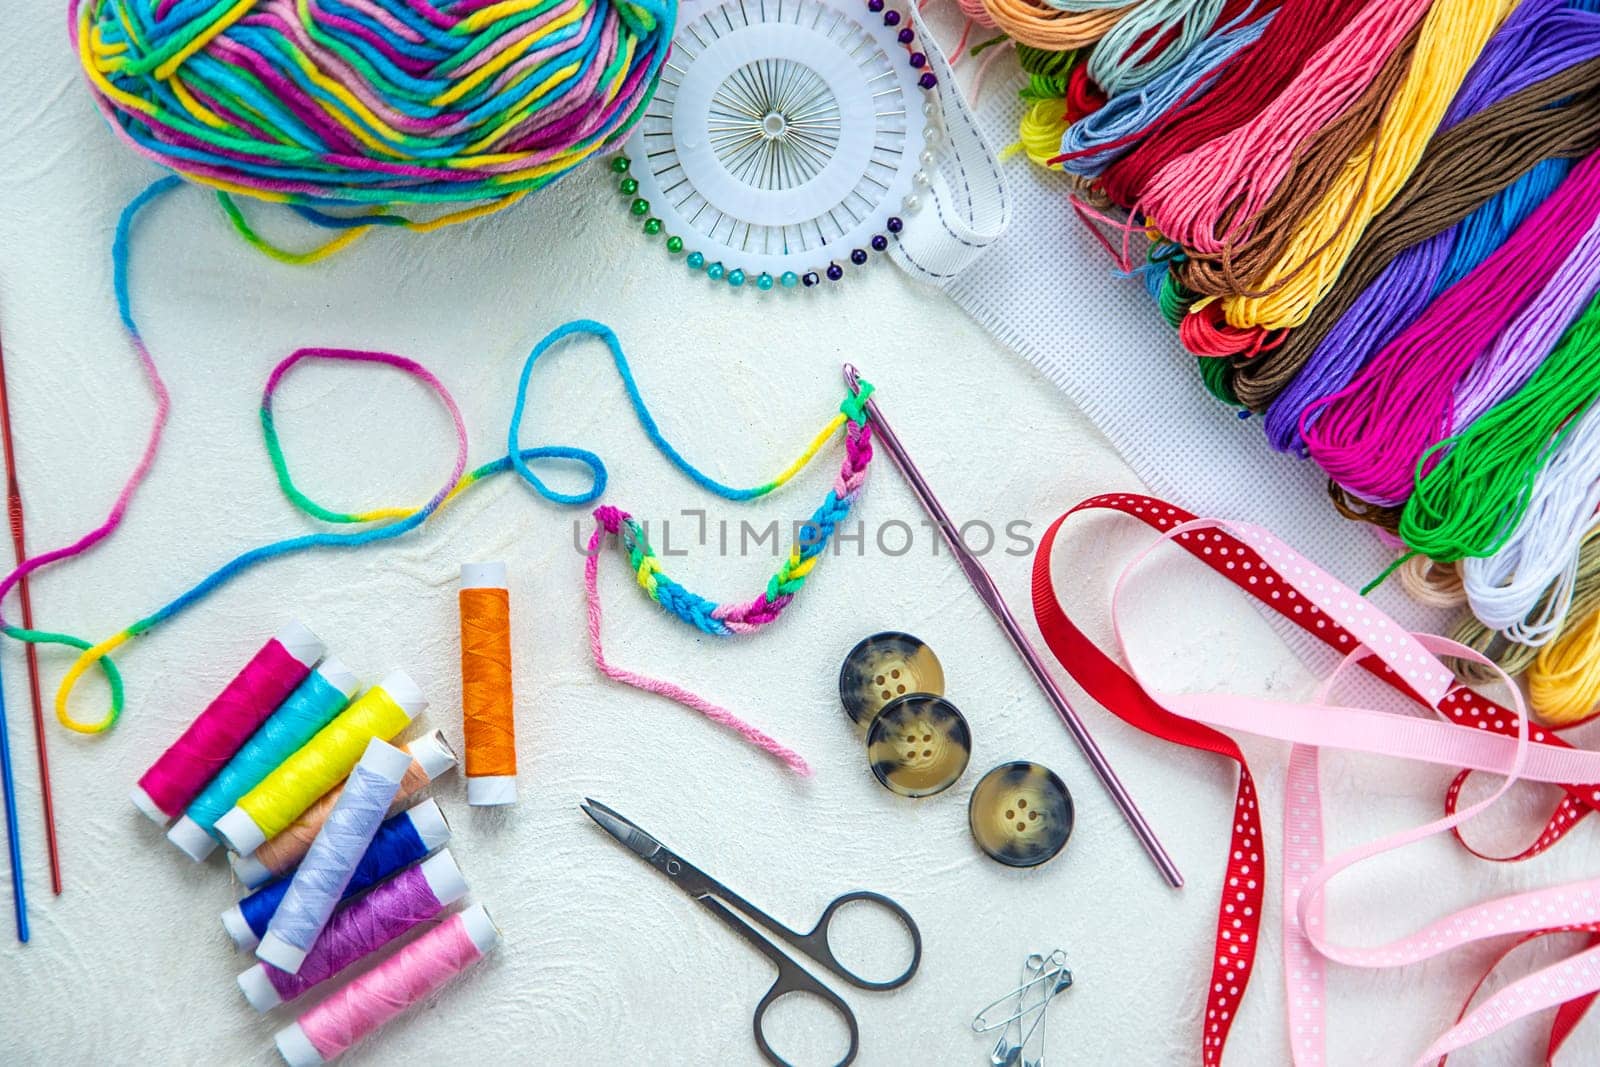 Threads and accessories for sewing and knitting. Selective focus. white.